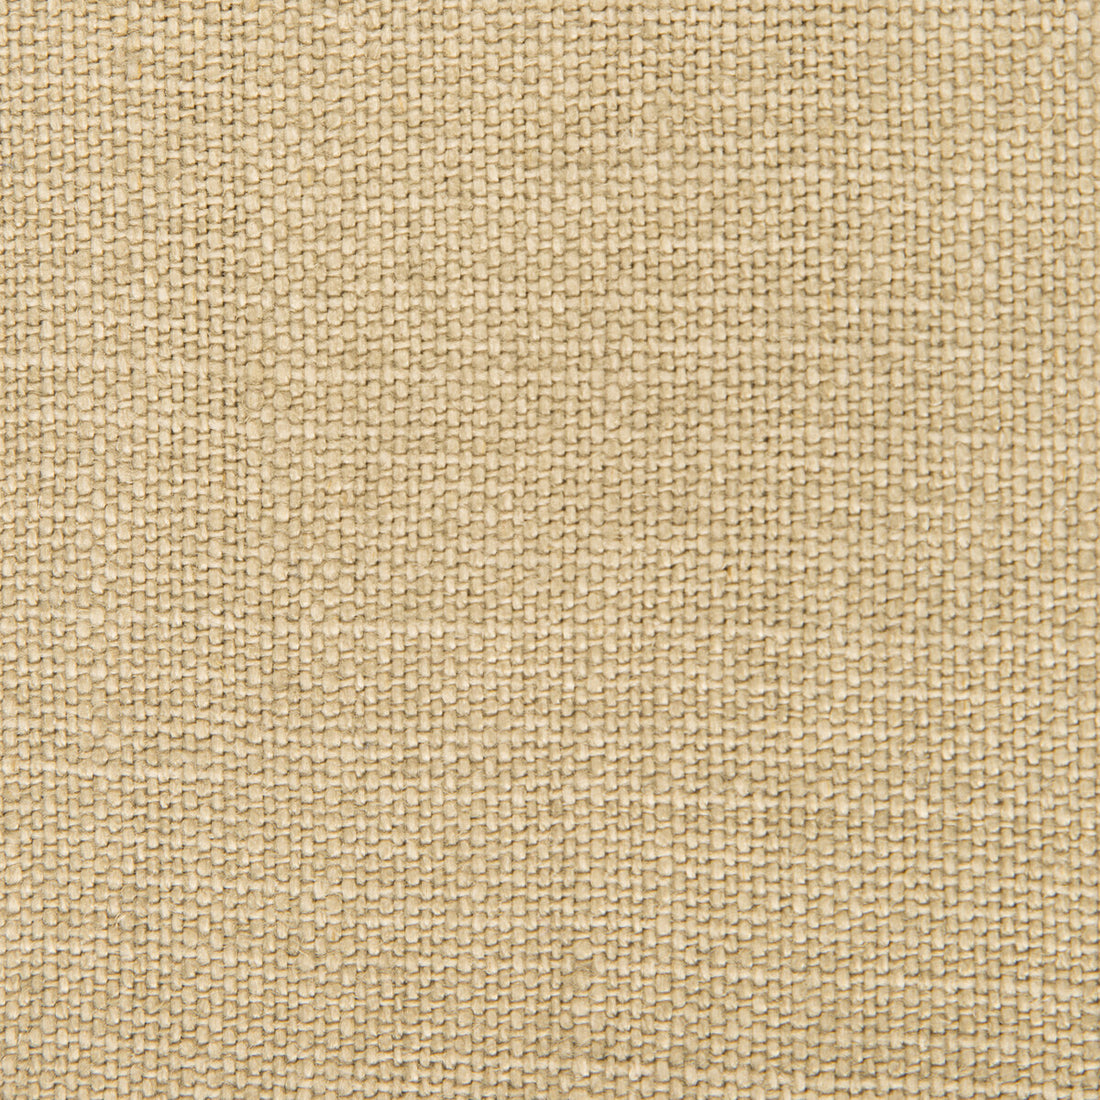 Nicaragua fabric in kaki color - pattern GDT5239.024.0 - by Gaston y Daniela in the Basics collection